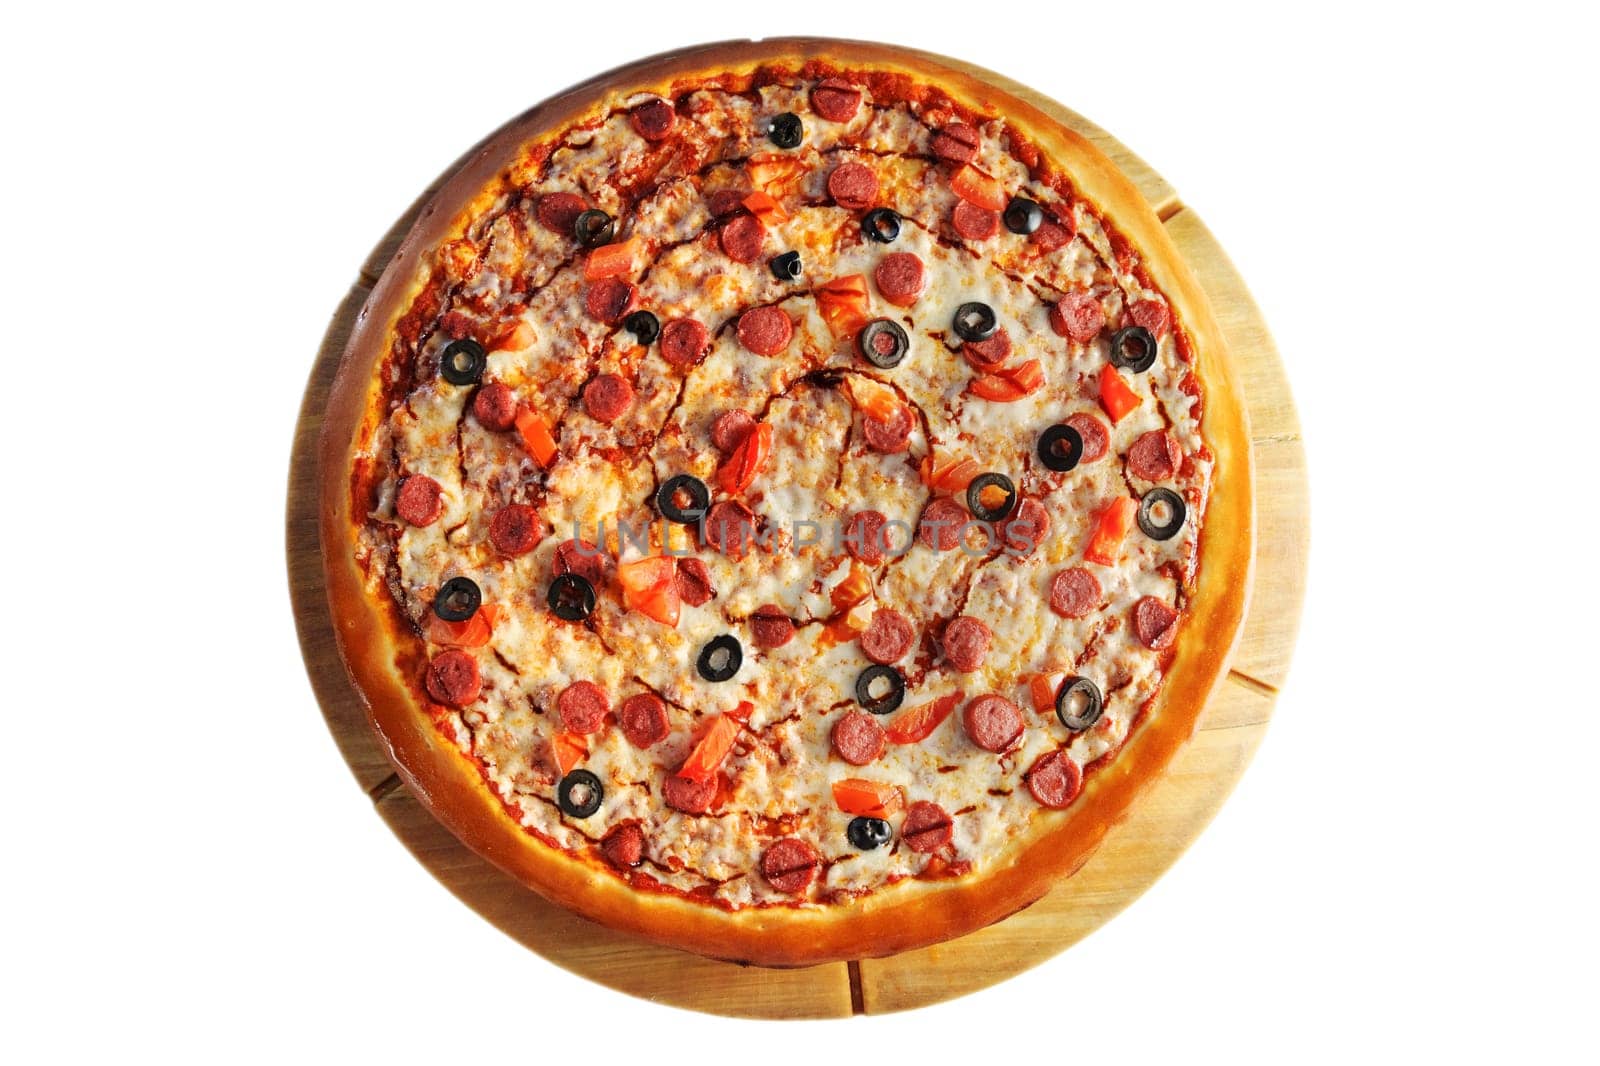 Pepperoni pizza adorned with black olives and red bell pepper slices, presented on a round wooden board isolated on a white background